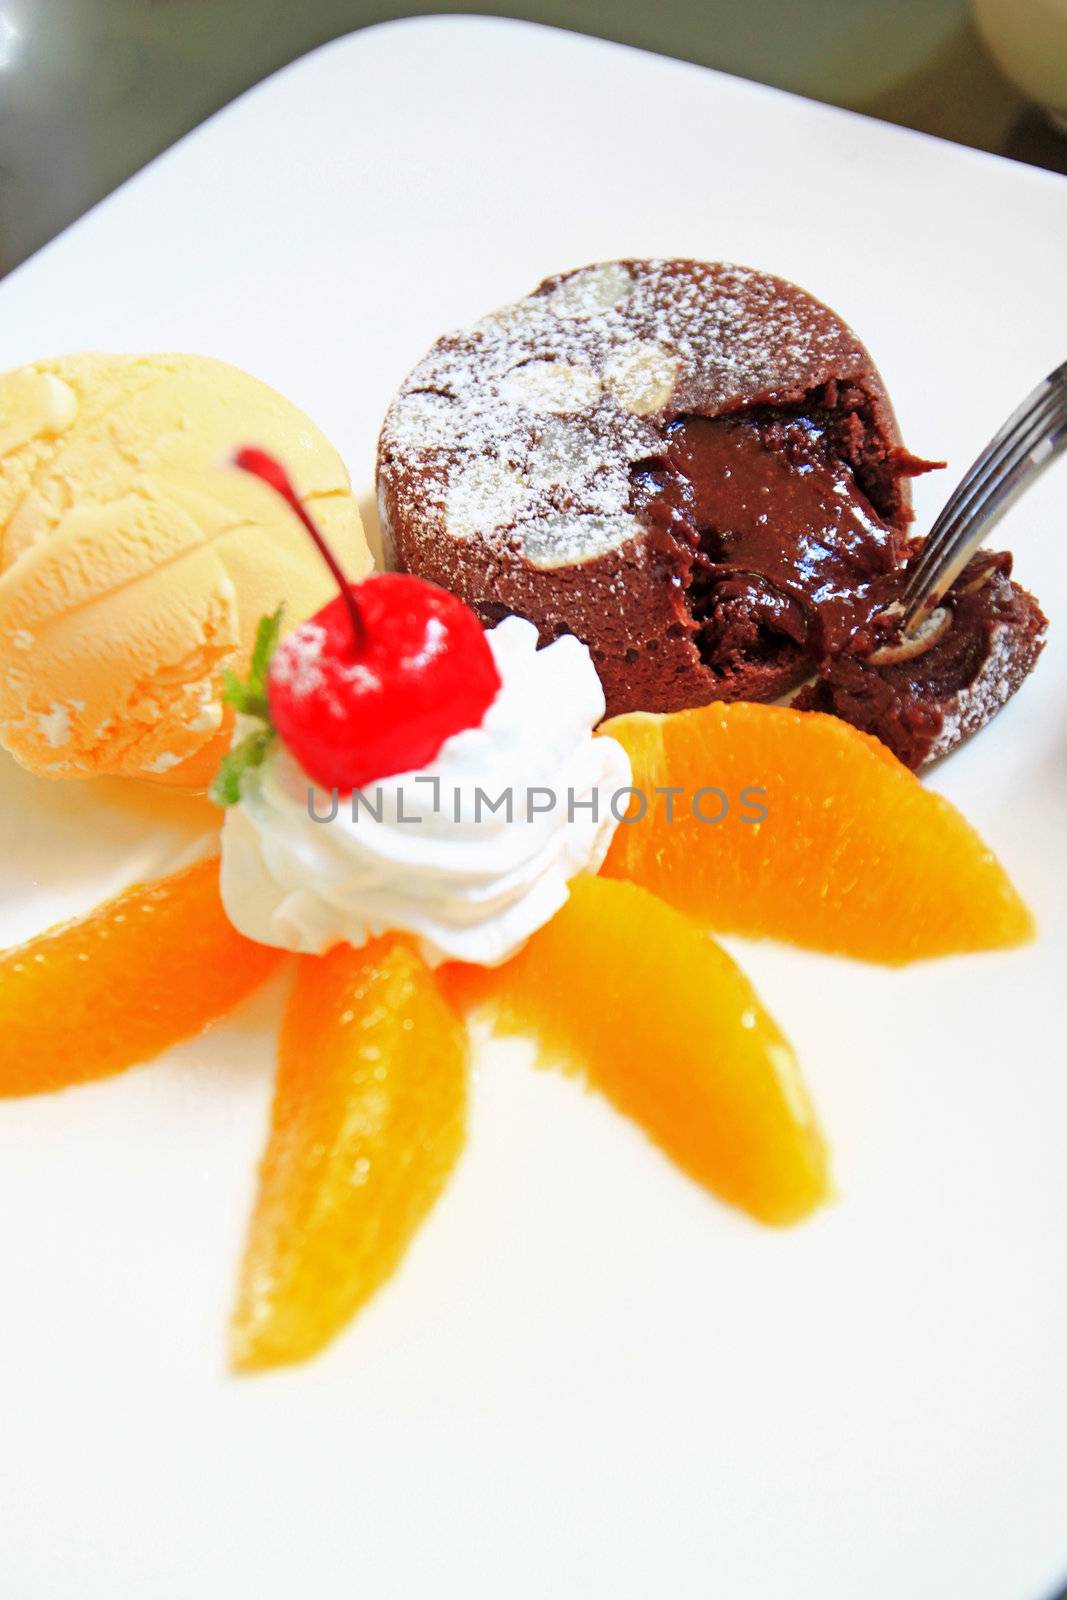 hot chocolate cake with ice cream by nuchylee